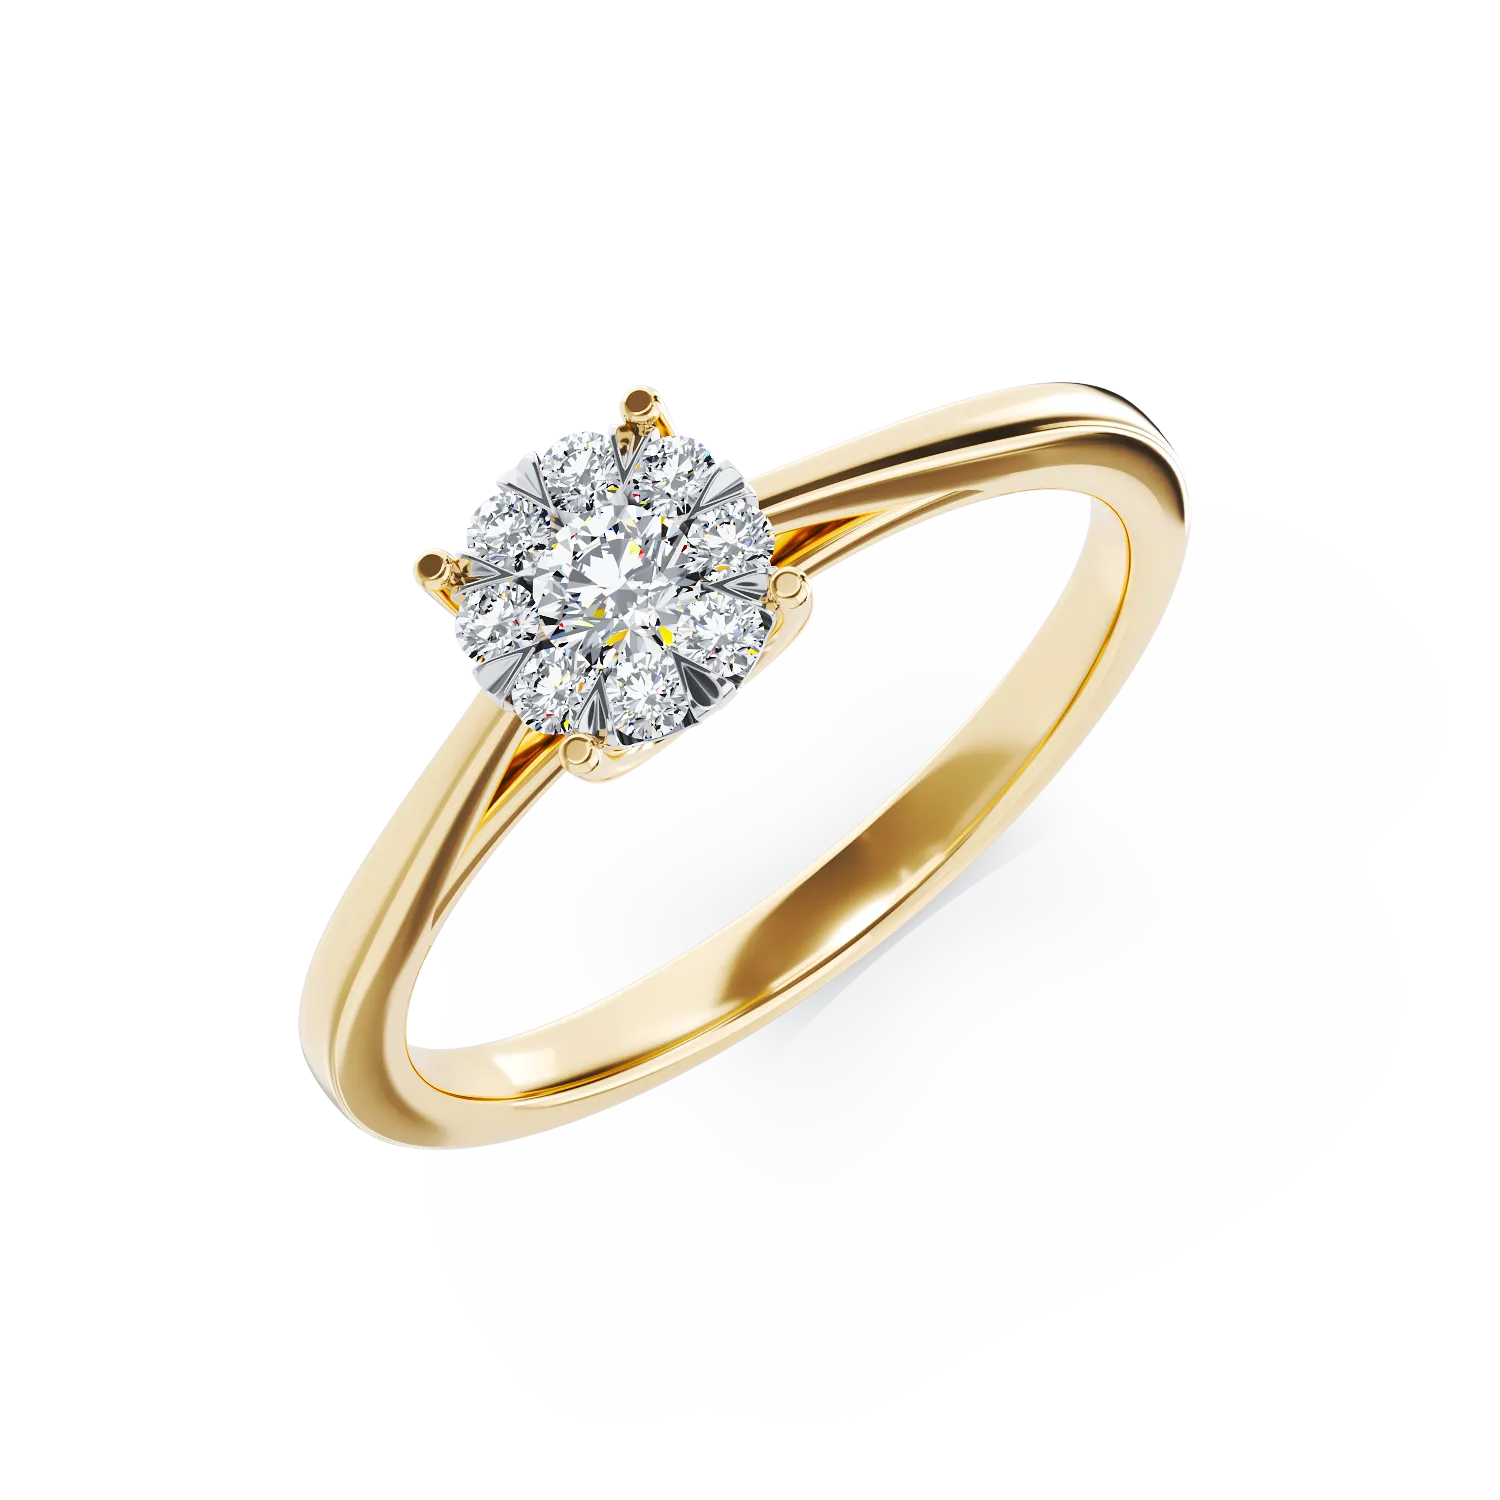 18K yellow gold engagement ring with diamonds of 0.2ct